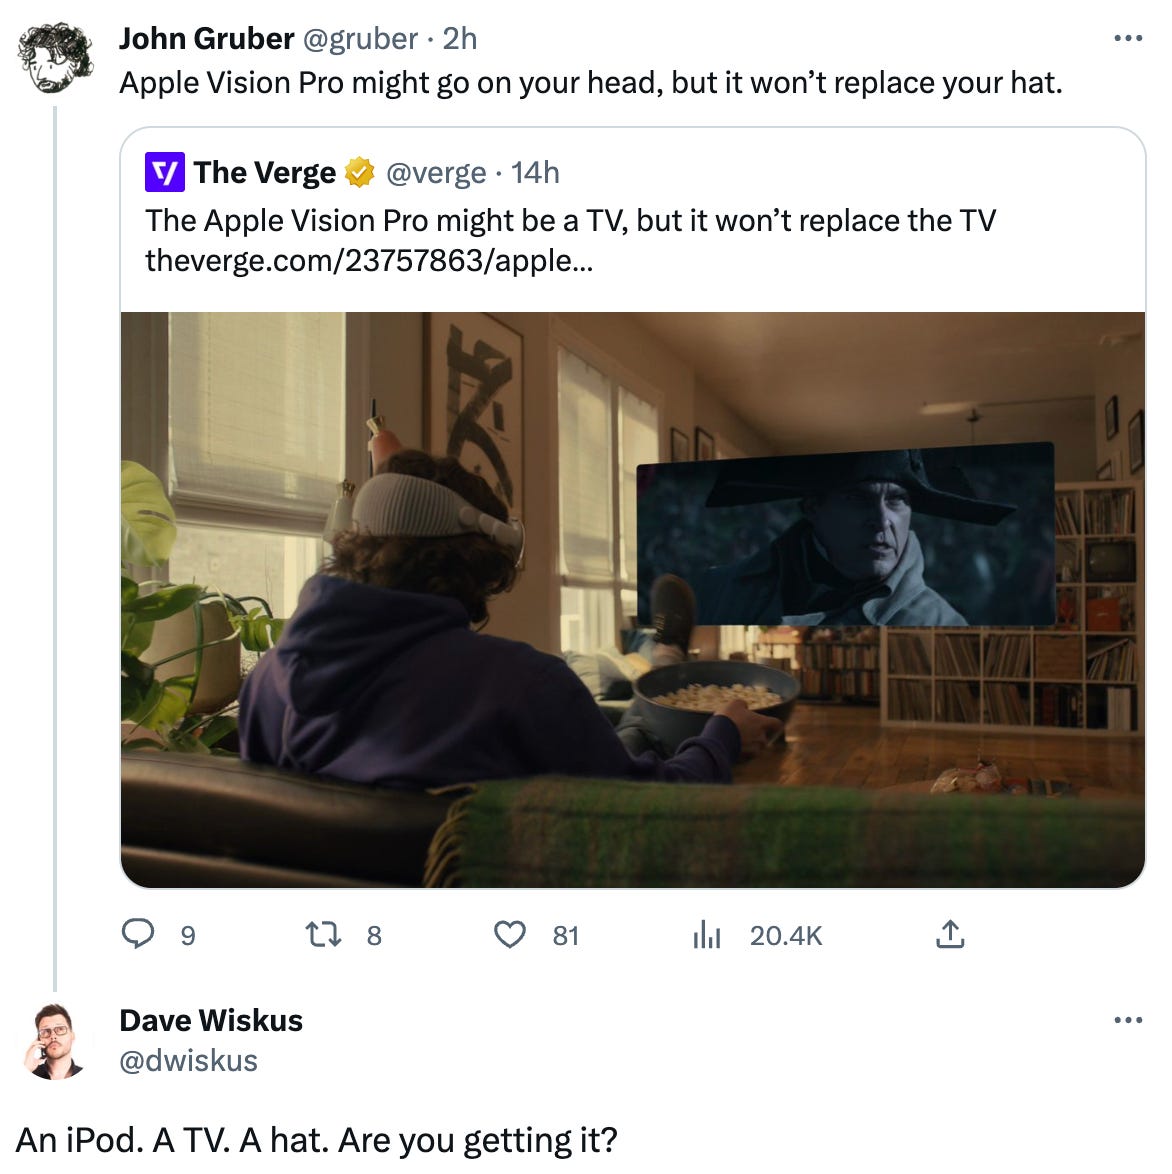 John Gruber @gruber · 2h Apple Vision Pro might go on your head, but it won’t replace your hat. Quote Tweet The Verge @verge · 14h The Apple Vision Pro might be a TV, but it won’t replace the TV https://theverge.com/23757863/apple-vision-pro-replace-tv-never?utm_campaign=theverge&utm_content=chorus&utm_medium=social&utm_source=twitter Dave Wiskus @dwiskus An iPod. A TV. A hat. Are you getting it?